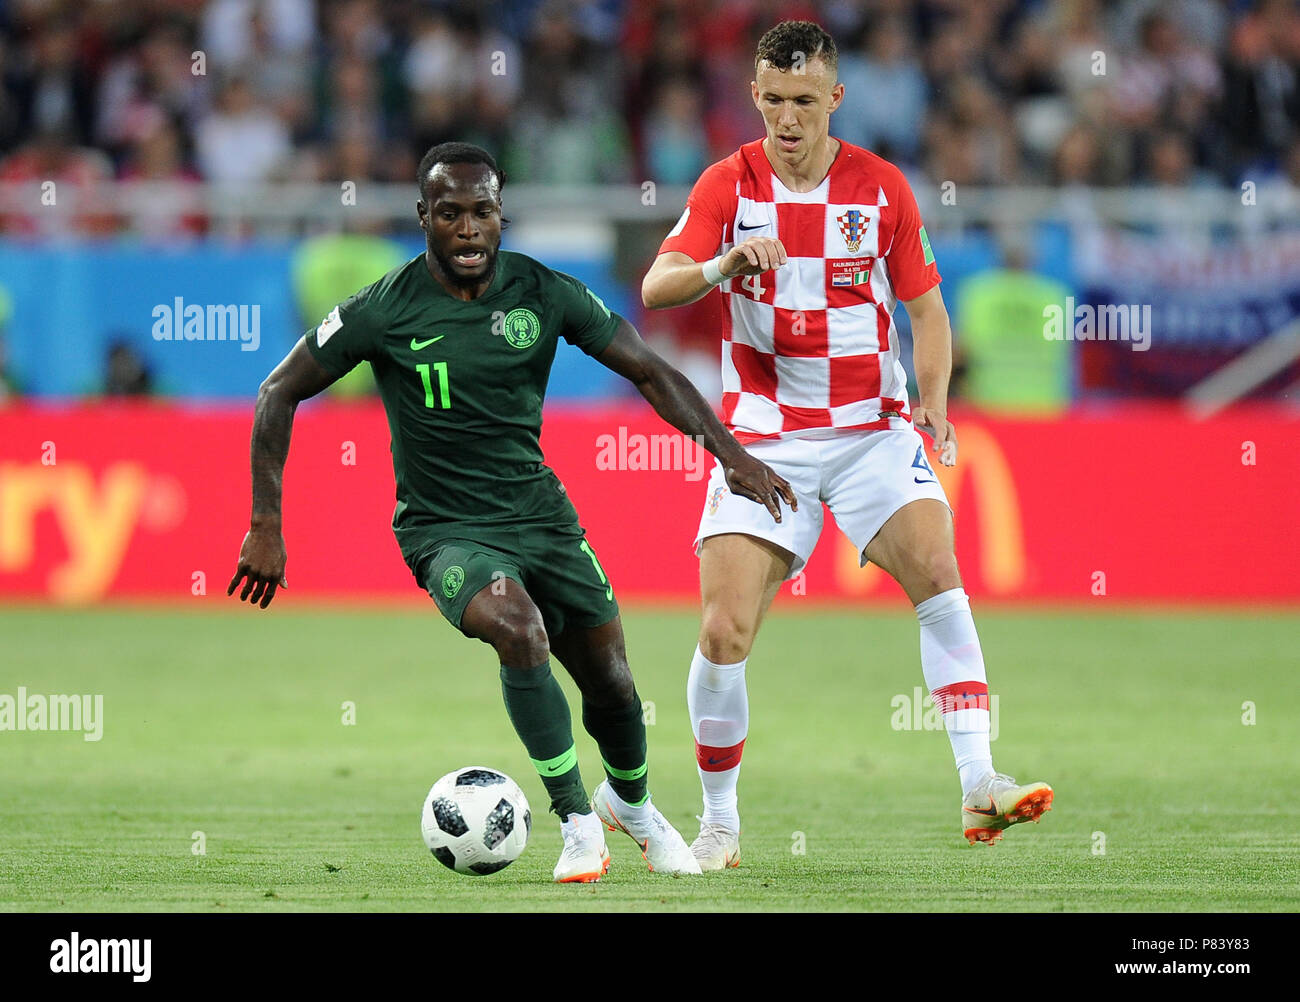 KALININGRAD, RUSSIA - JUNE 16: Victor Moses of Nigeria controls the ball during the 2018 FIFA World Cup Russia group D match between Croatia and Nigeria at Kaliningrad Stadium on June 16, 2018 in Kaliningrad, Russia. (Photo by Norbert Barczyk/PressFocus/MB Media) Stock Photo